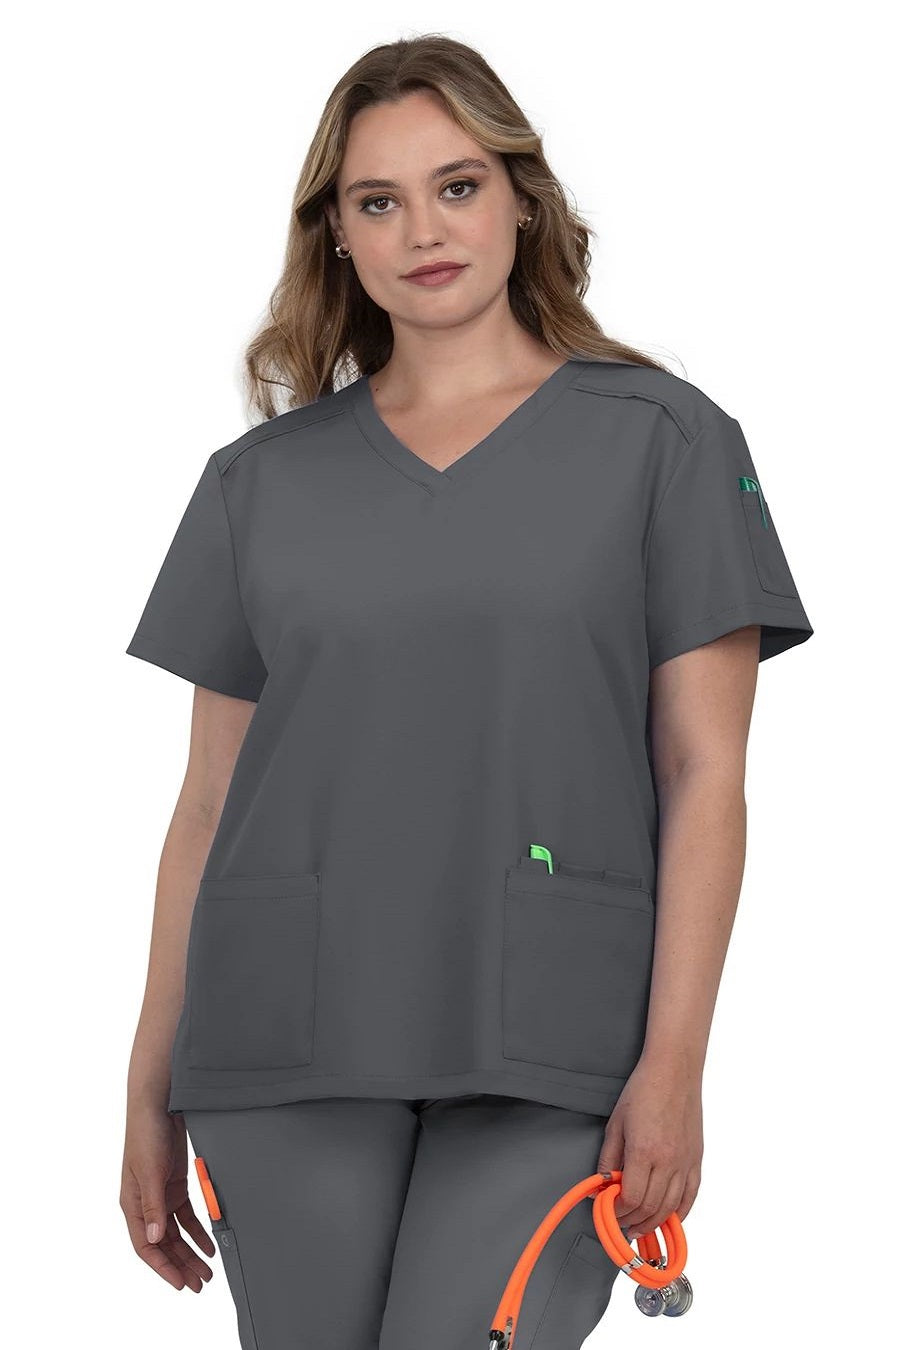 koi Scrub Top Cureology Cardi in Pewter at Parker's Clothing and Shoes.